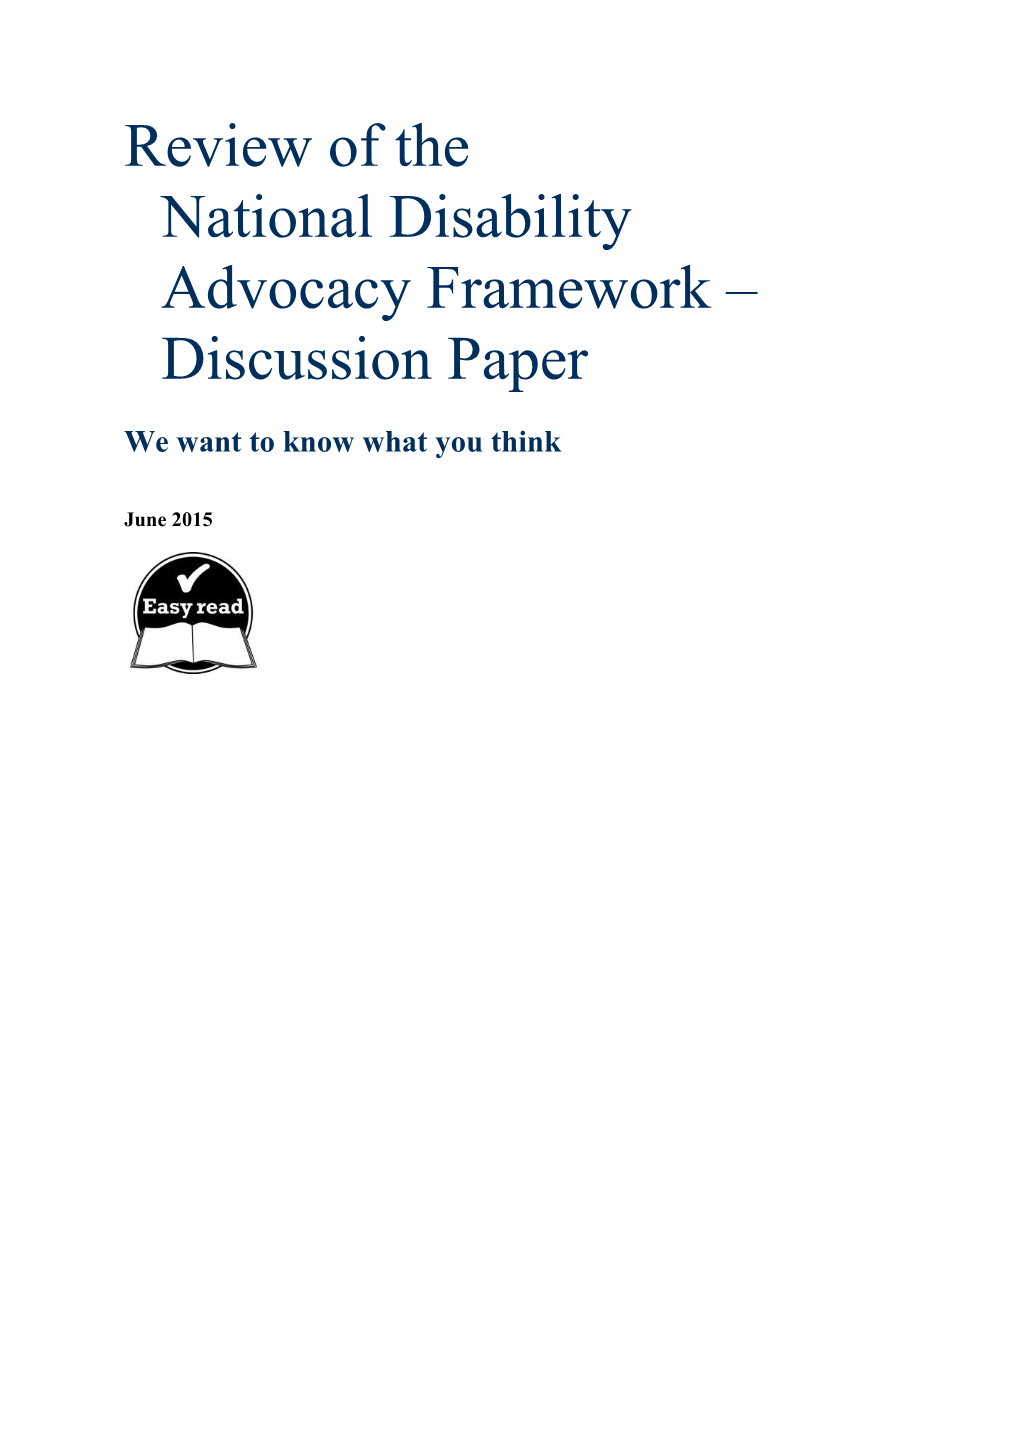 Review of Thenational Disability Advocacy Framework Discussion Paper